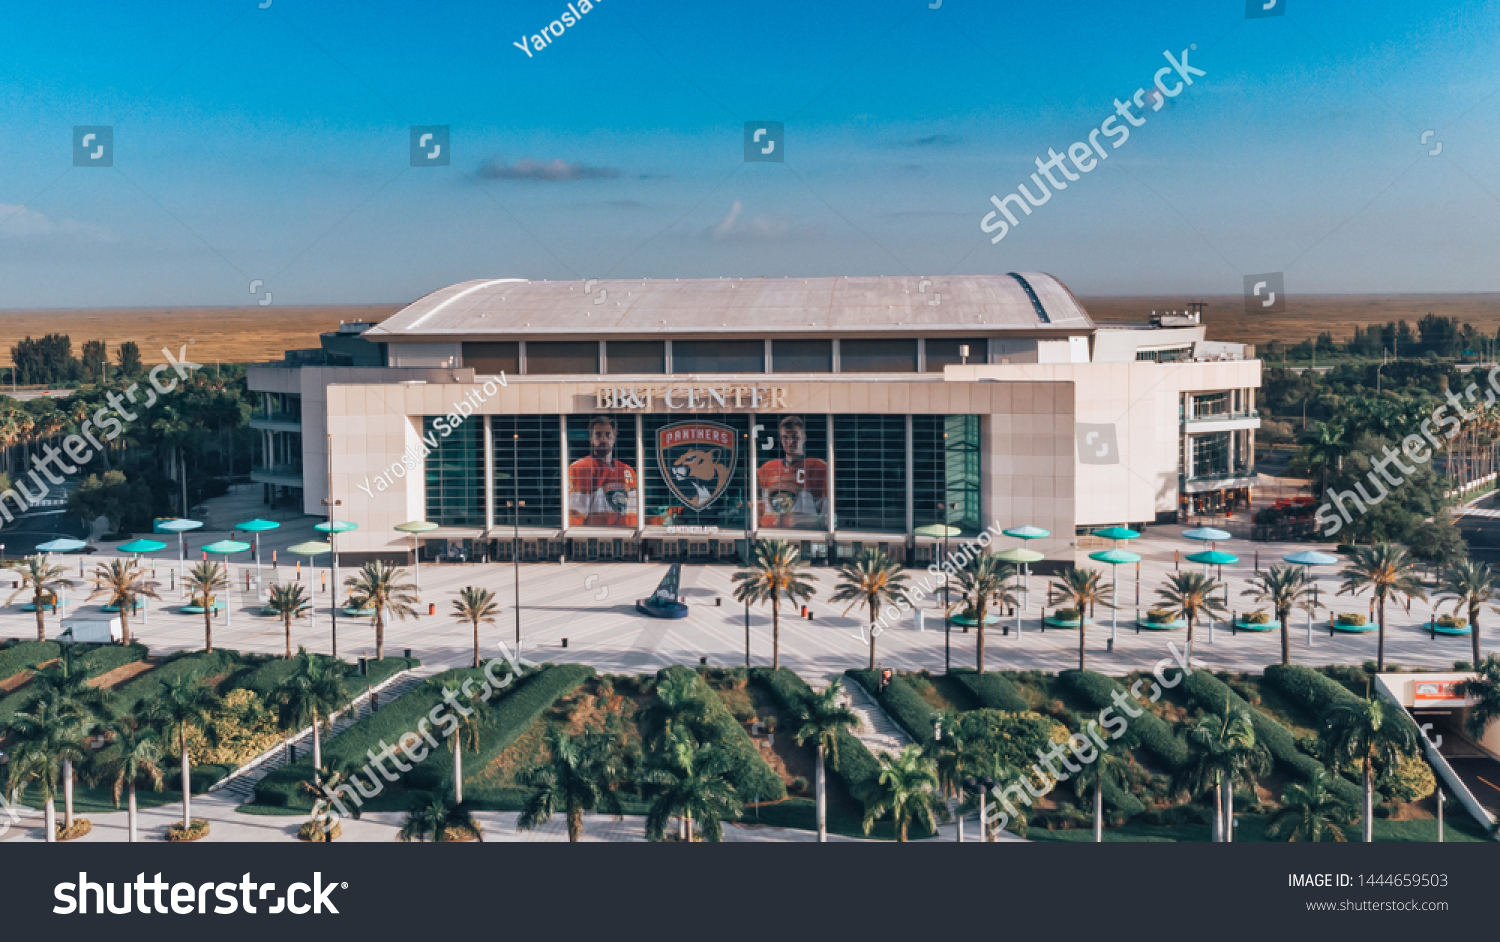 Stock Photo Sunrise Florida Usa July Aerial View On Bb T Center Indoor Arena And Home For The 1444659503 